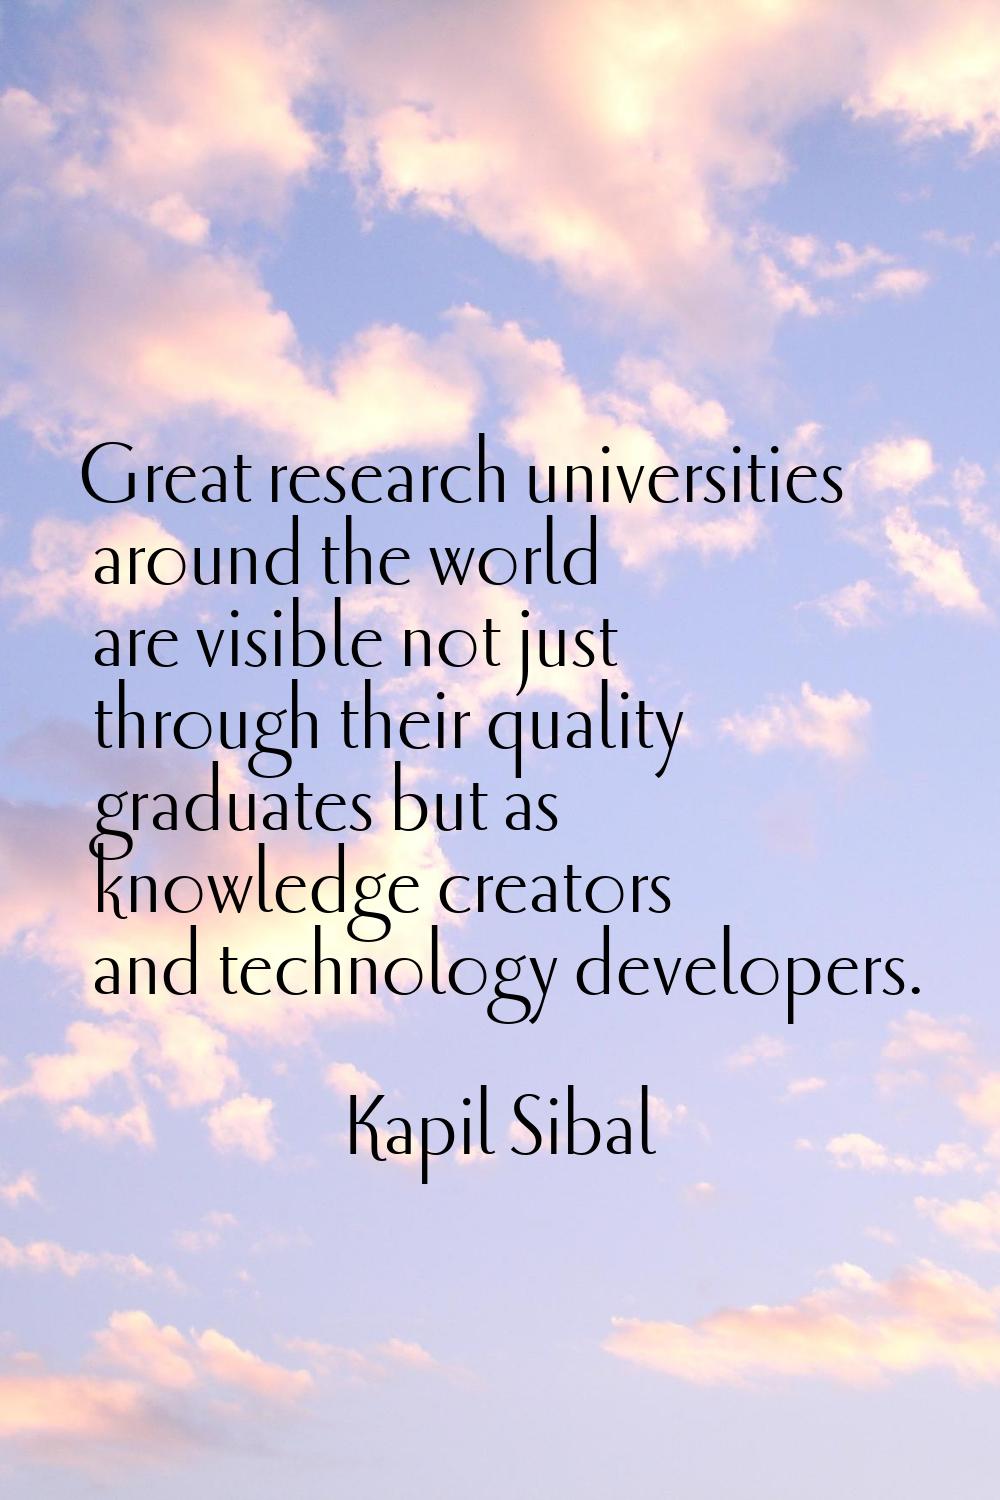 Great research universities around the world are visible not just through their quality graduates b